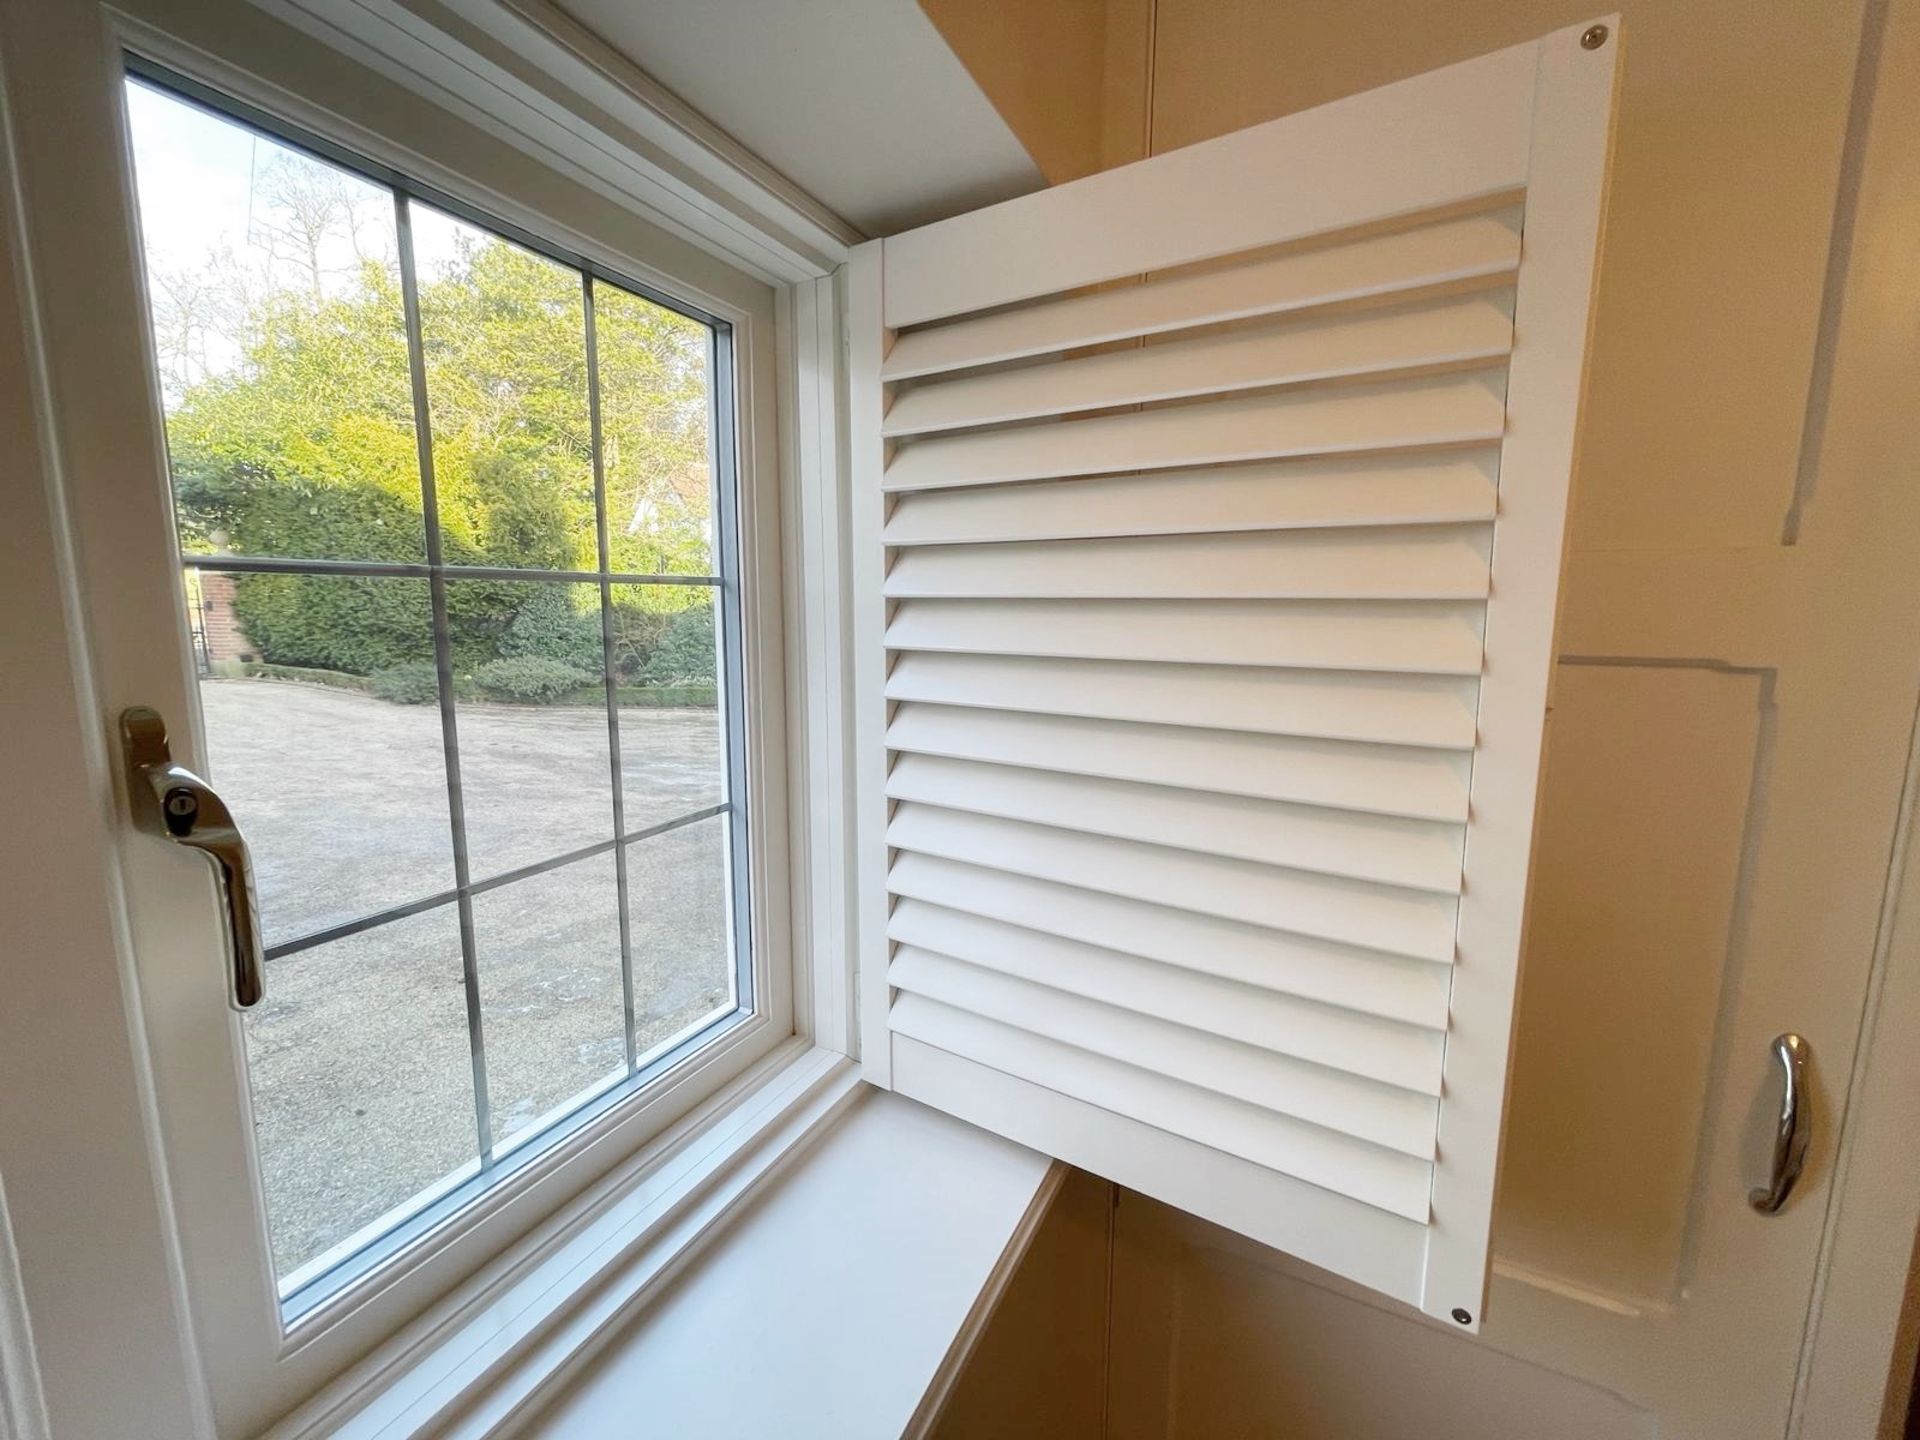 1 x Hardwood Timber Double Glazed Leaded 2-Pane Window Frame fitted with Shutter Blinds - NO VAT - Image 10 of 12